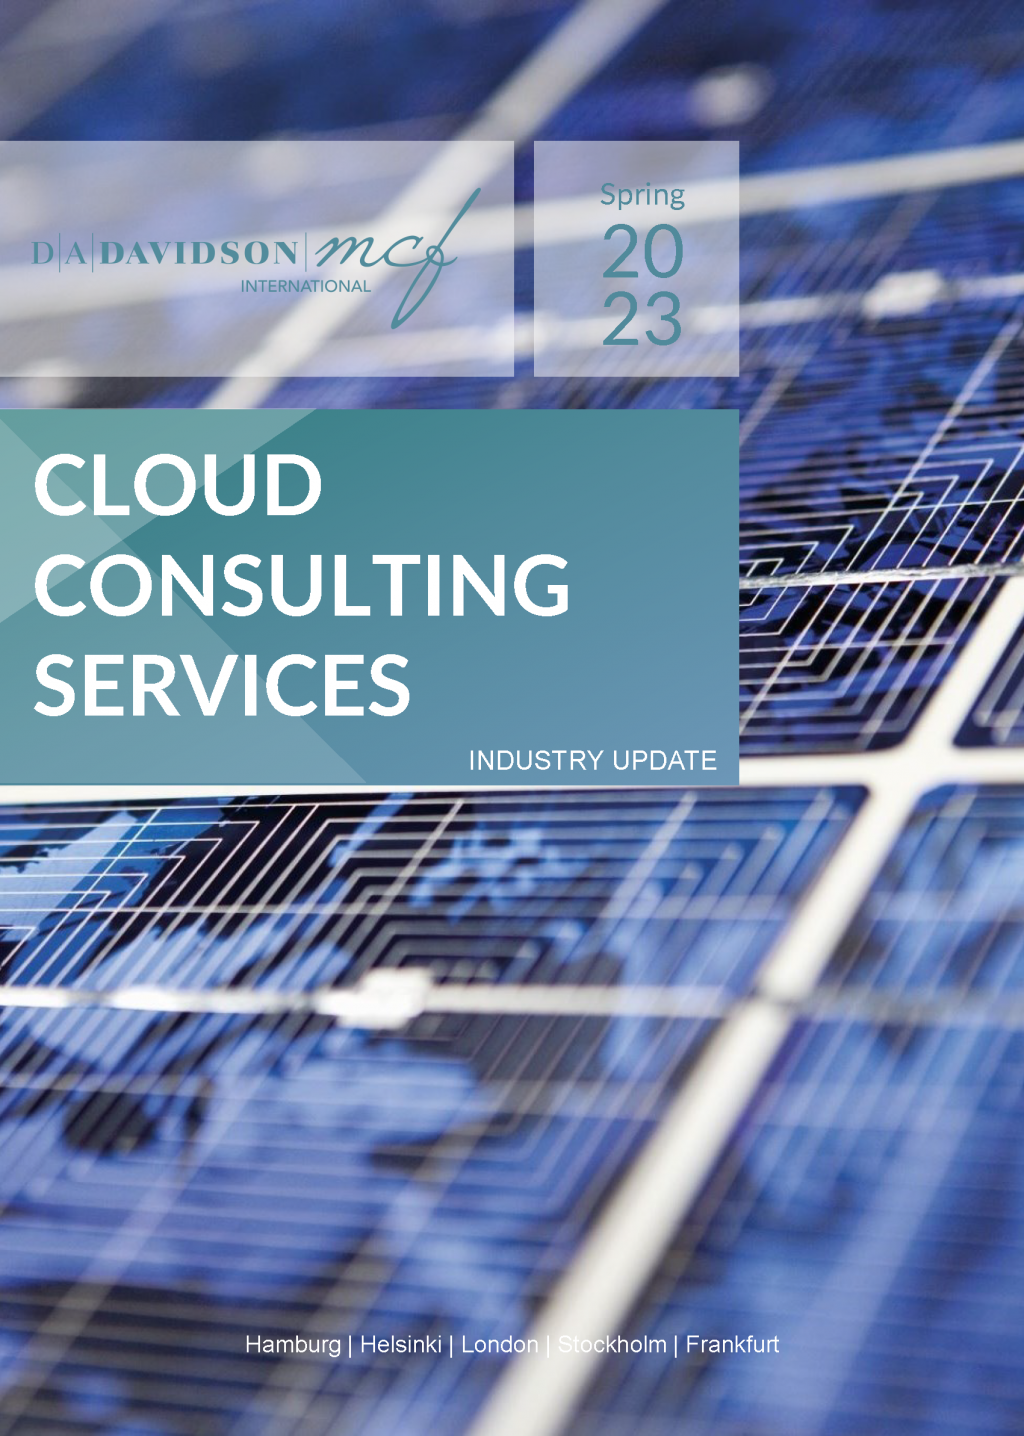 Front cover of the Cloud Consulting Services report - picture of a blue computer chip in the background